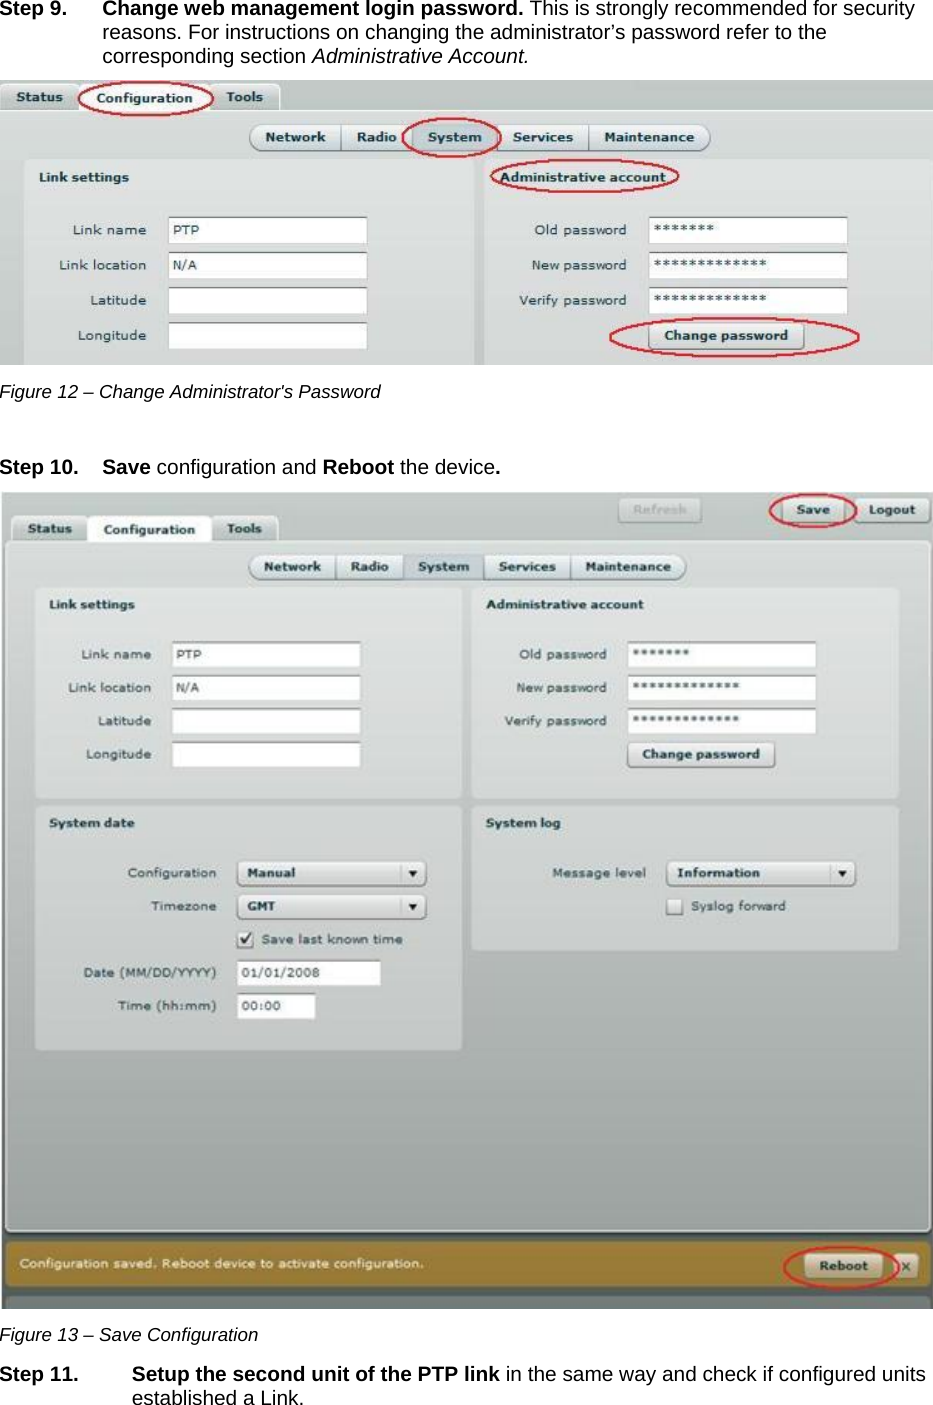  LigoWave Page 15  Step 9.  Change web management login password. This is strongly recommended for security reasons. For instructions on changing the administrator’s password refer to the corresponding section Administrative Account.  Figure 12 – Change Administrator&apos;s Password  Step 10. Save configuration and Reboot the device.   Figure 13 – Save Configuration Step 11. Setup the second unit of the PTP link in the same way and check if configured units established a Link.  